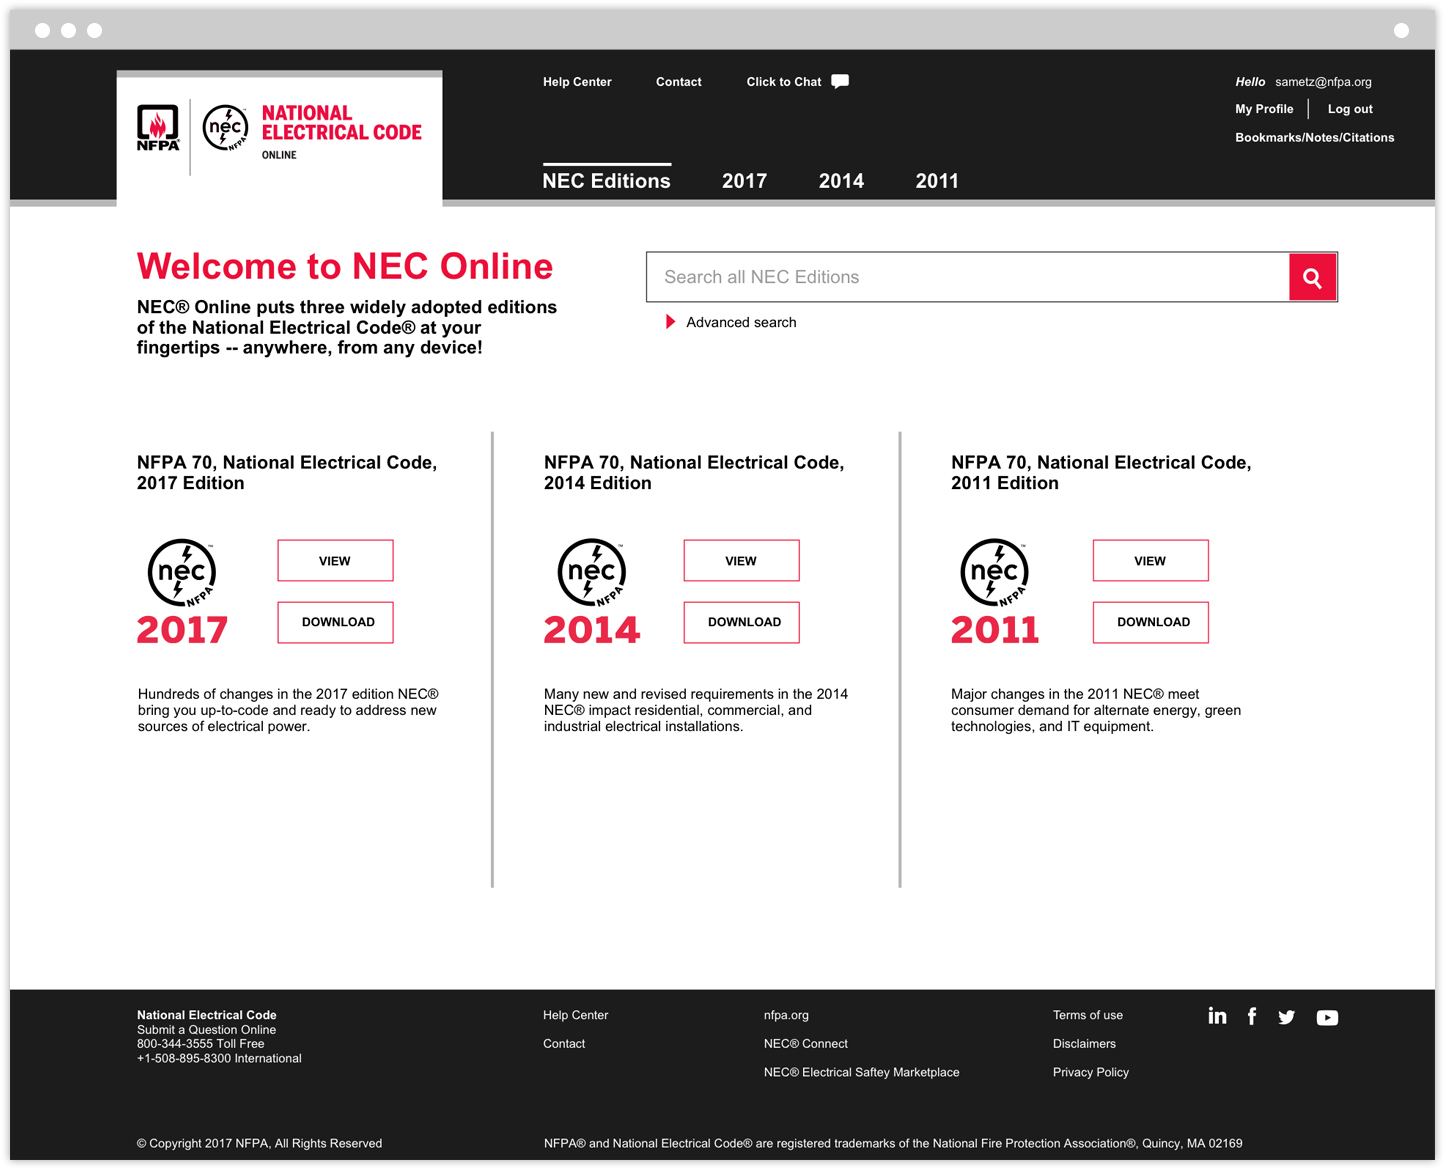 National Electric Code website homepage logged in view